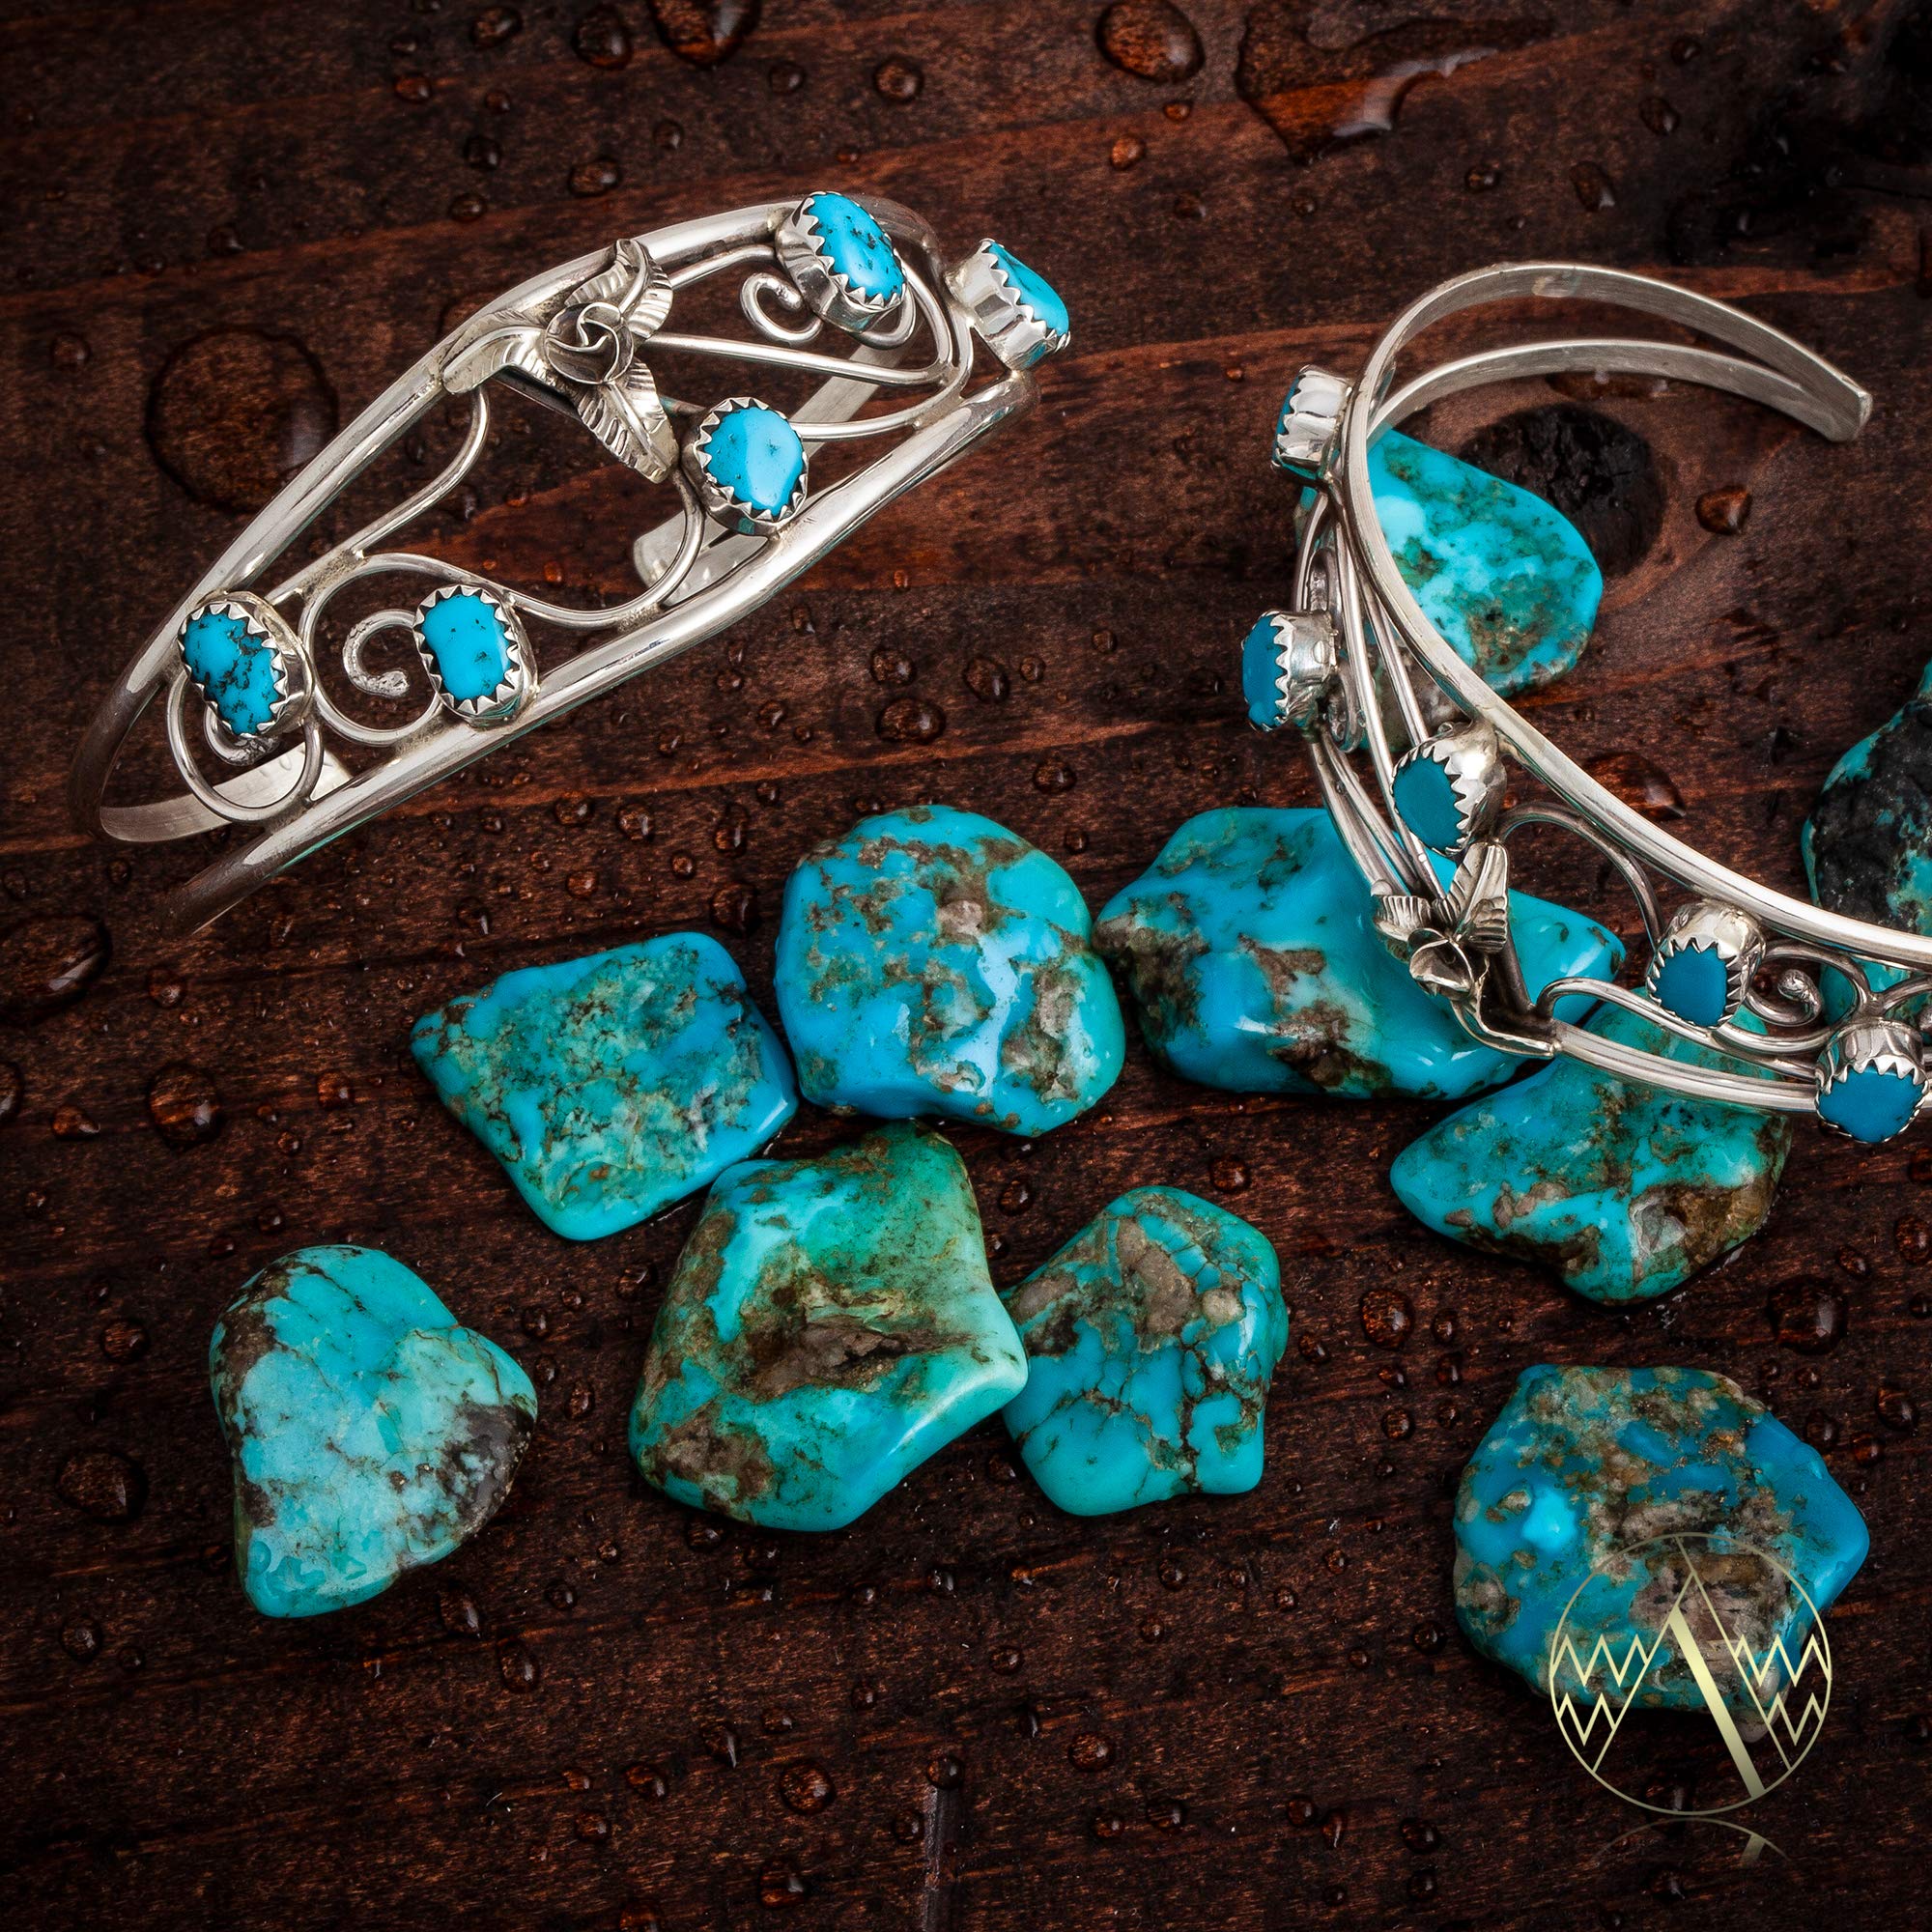 Native-Bay $300Tag Flower Silver Certified Navajo Arizona Sleeping Beauty Turquoise Cuff Bracelet 12947-2 Made by Loma Siiva